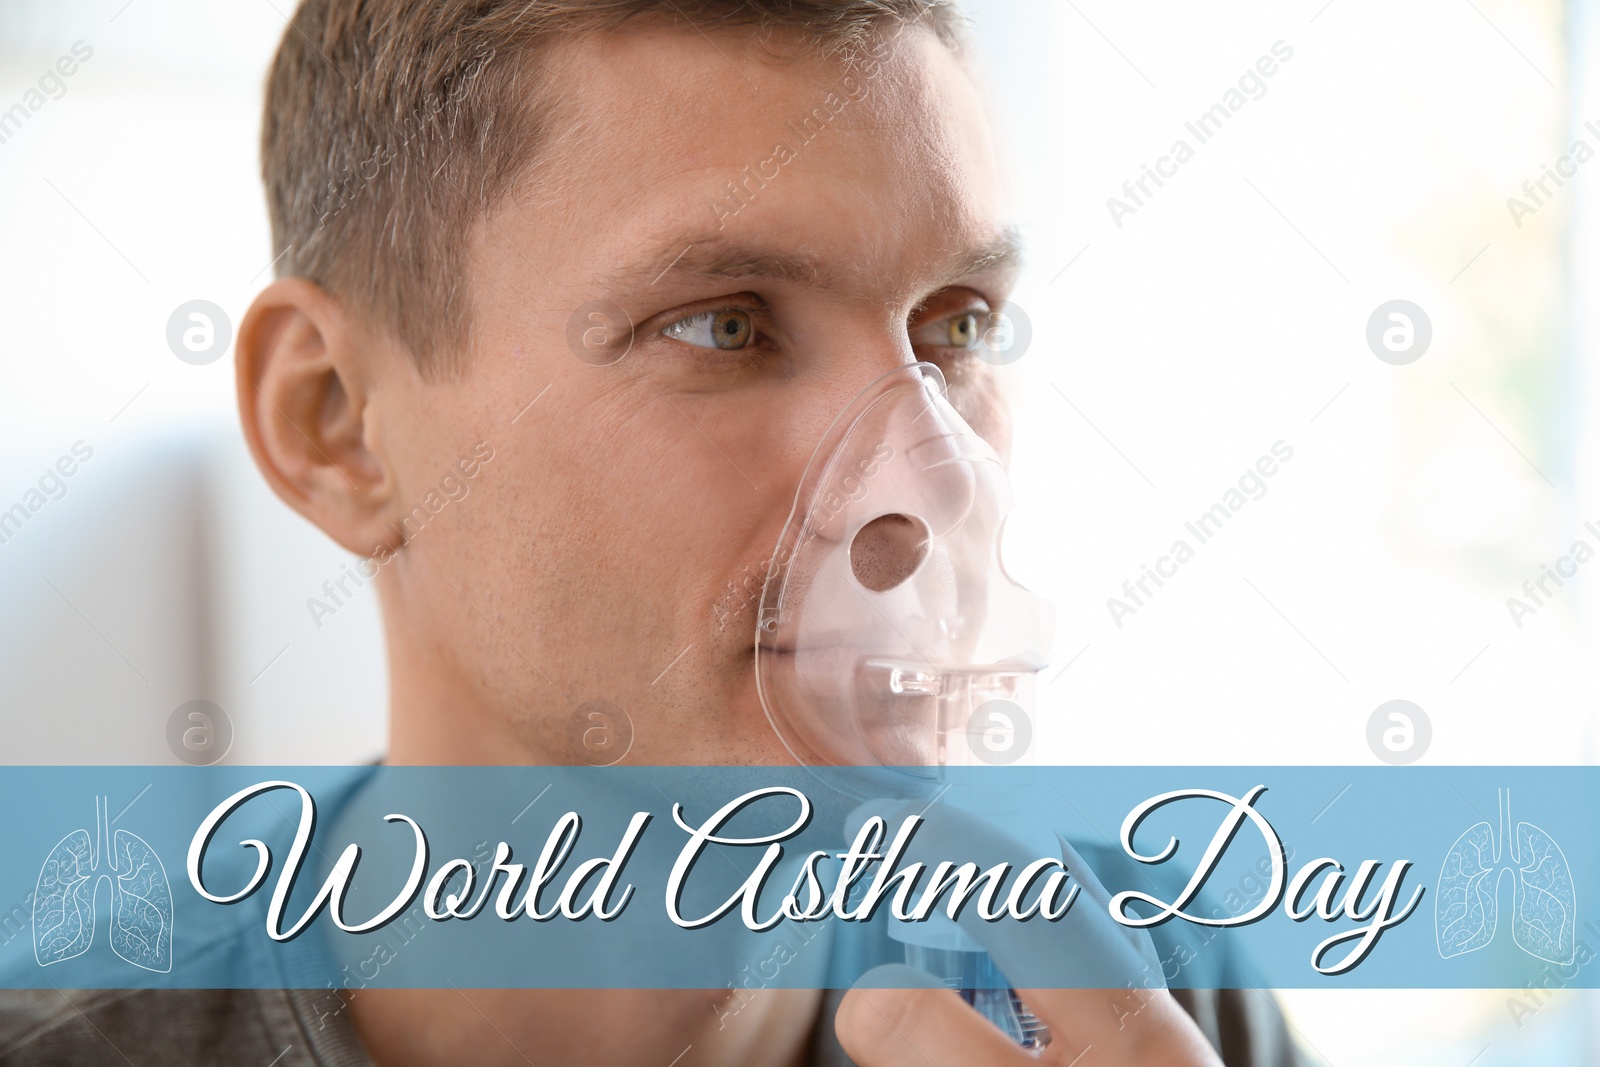 Image of World asthma day. Man using special machine indoors 